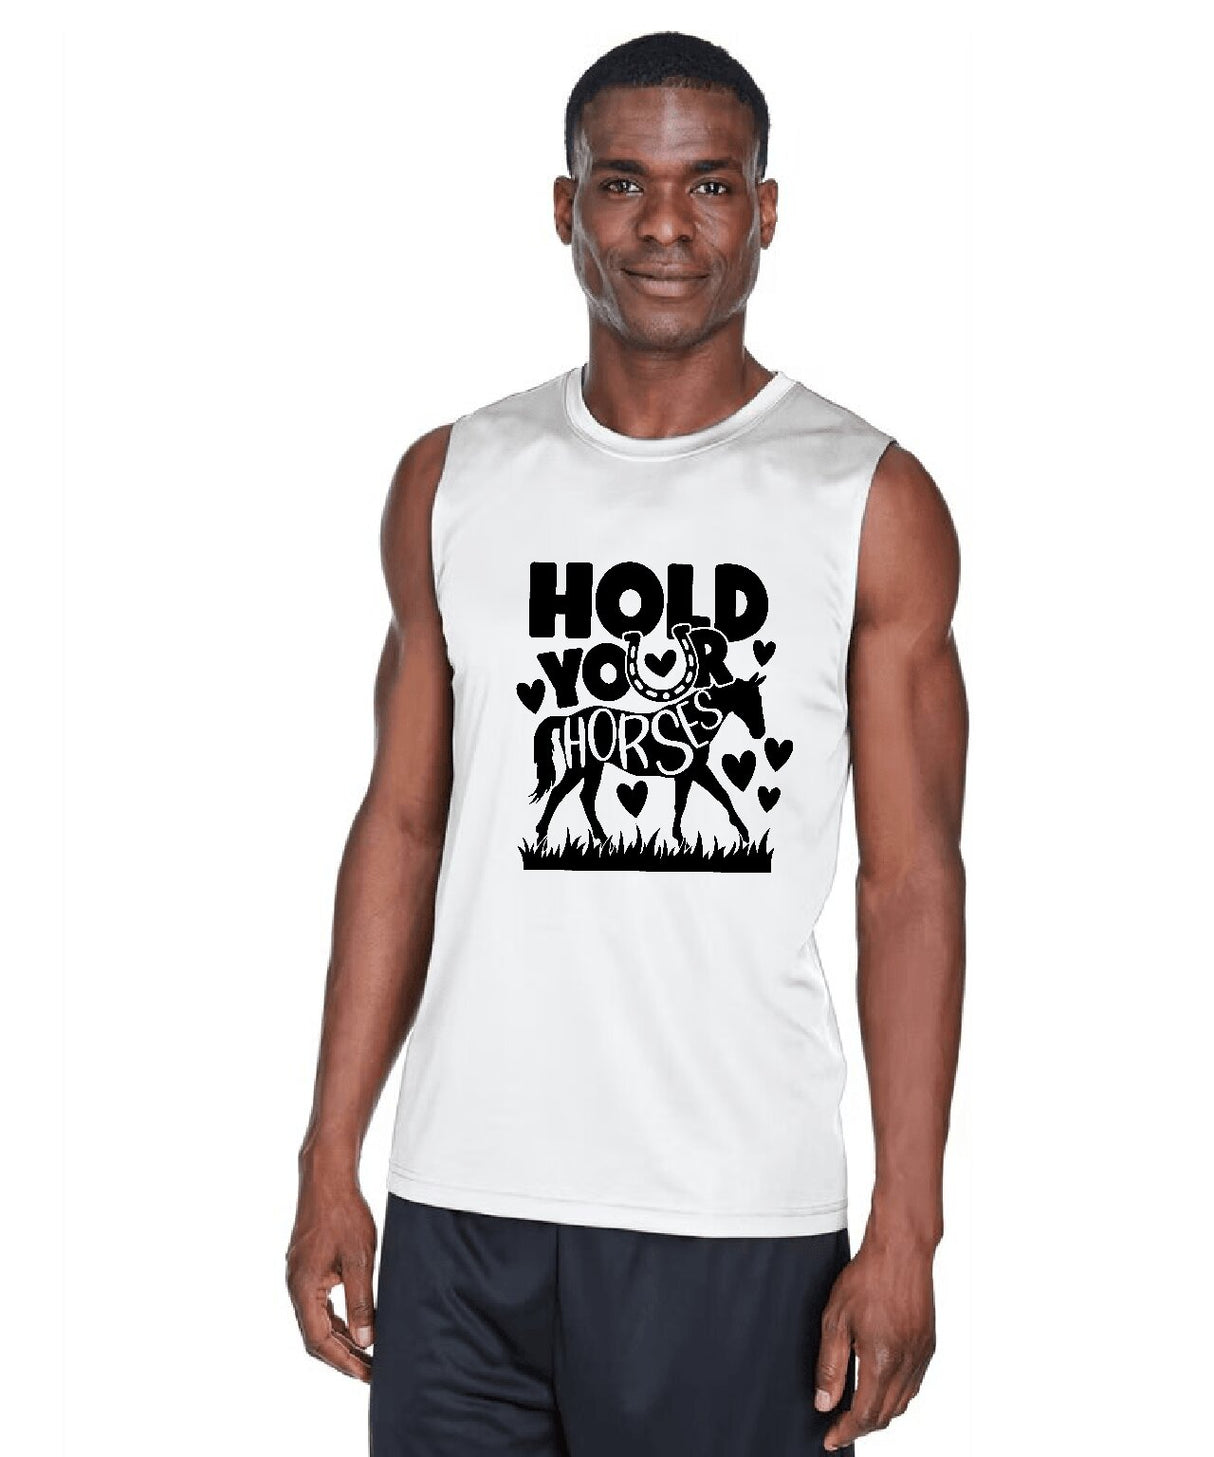 Hold Your Horses Design 2 - Tank Top